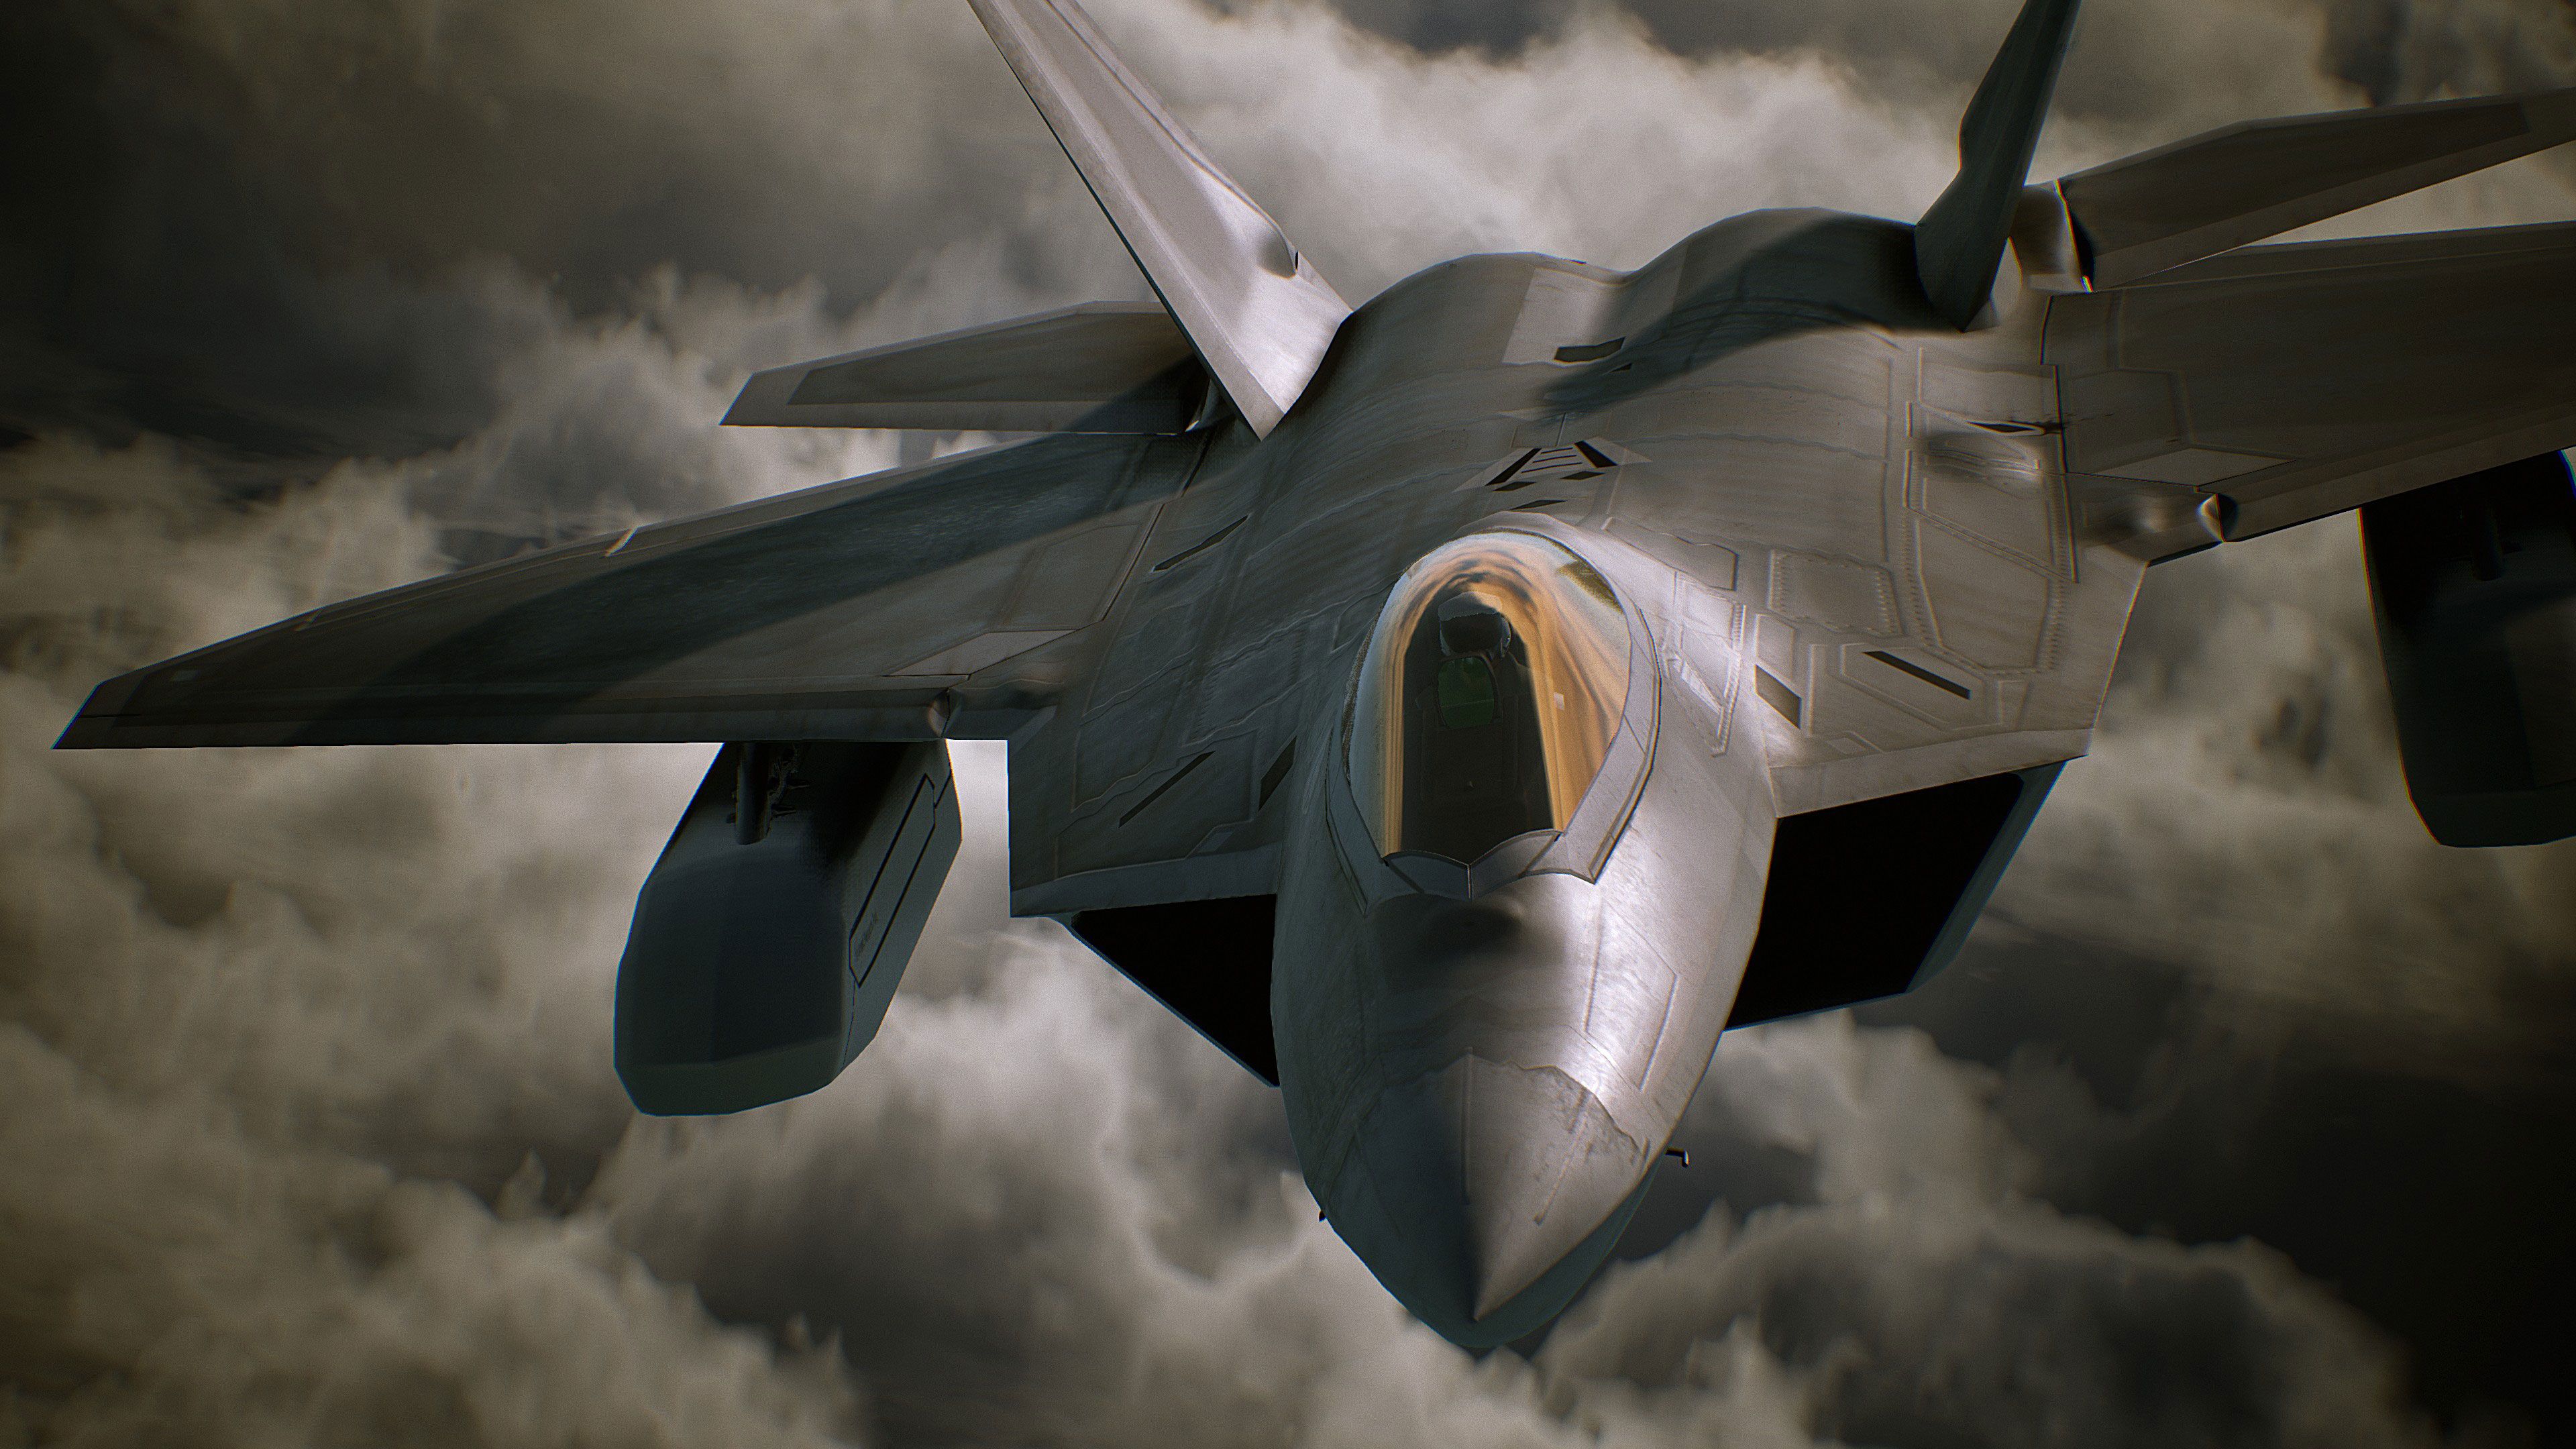 ace combat 7 skies unknown wallpapers wallpaper cave wallpaper cave